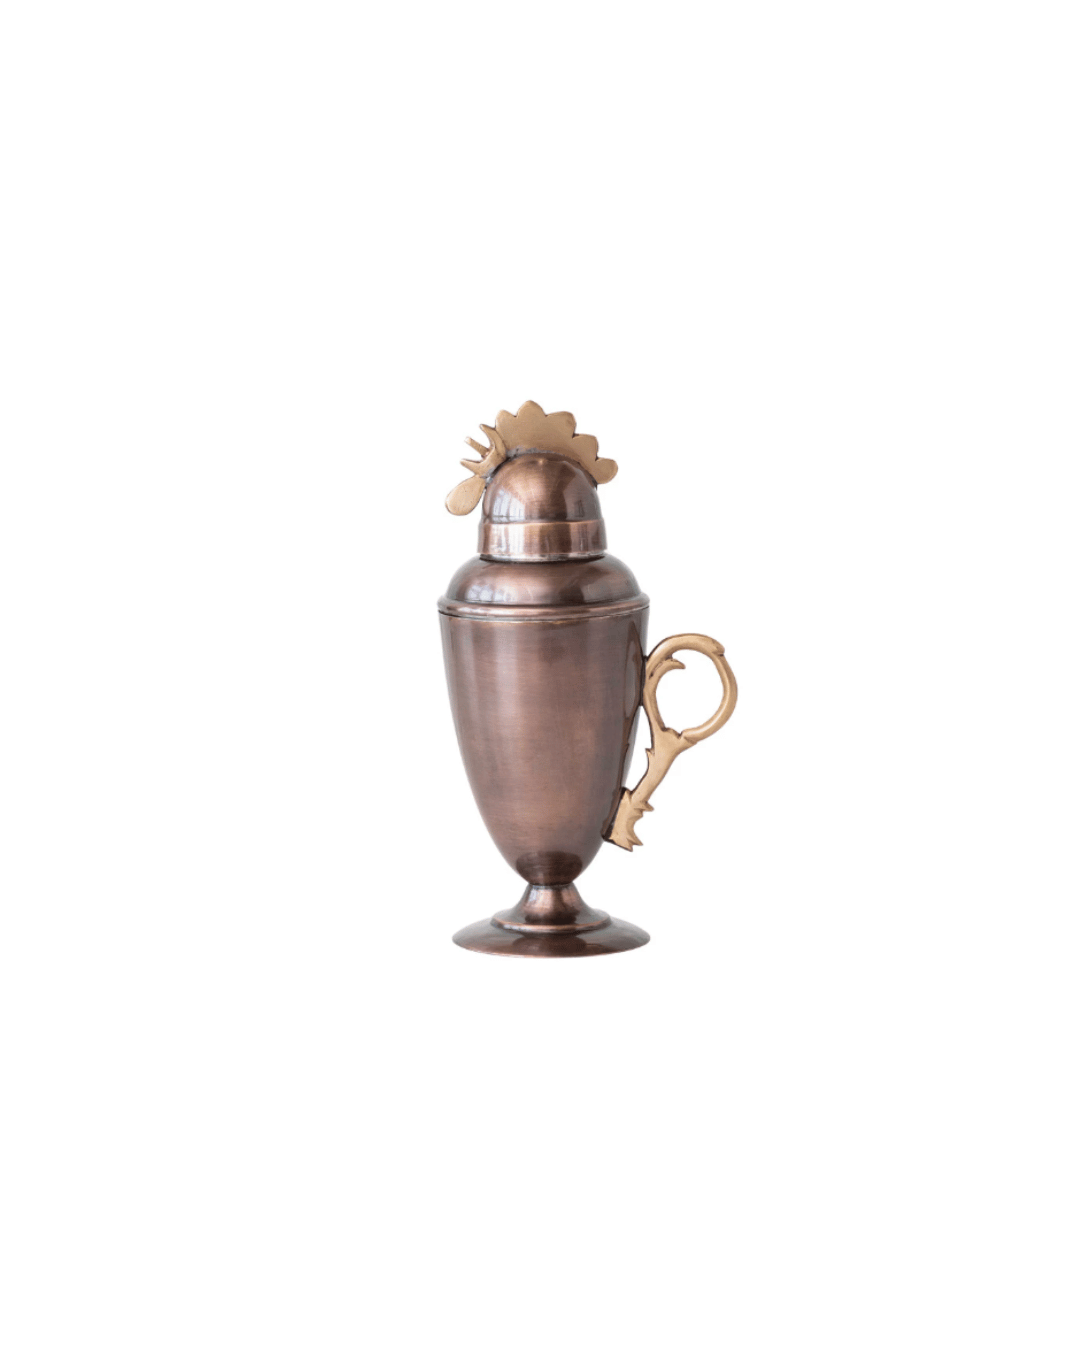 An antique bronze Rooster Cocktail Shaker by Creative Co-op with an ornate lid and handle, isolated on a white background, reminiscent of a Scottsdale bungalow.